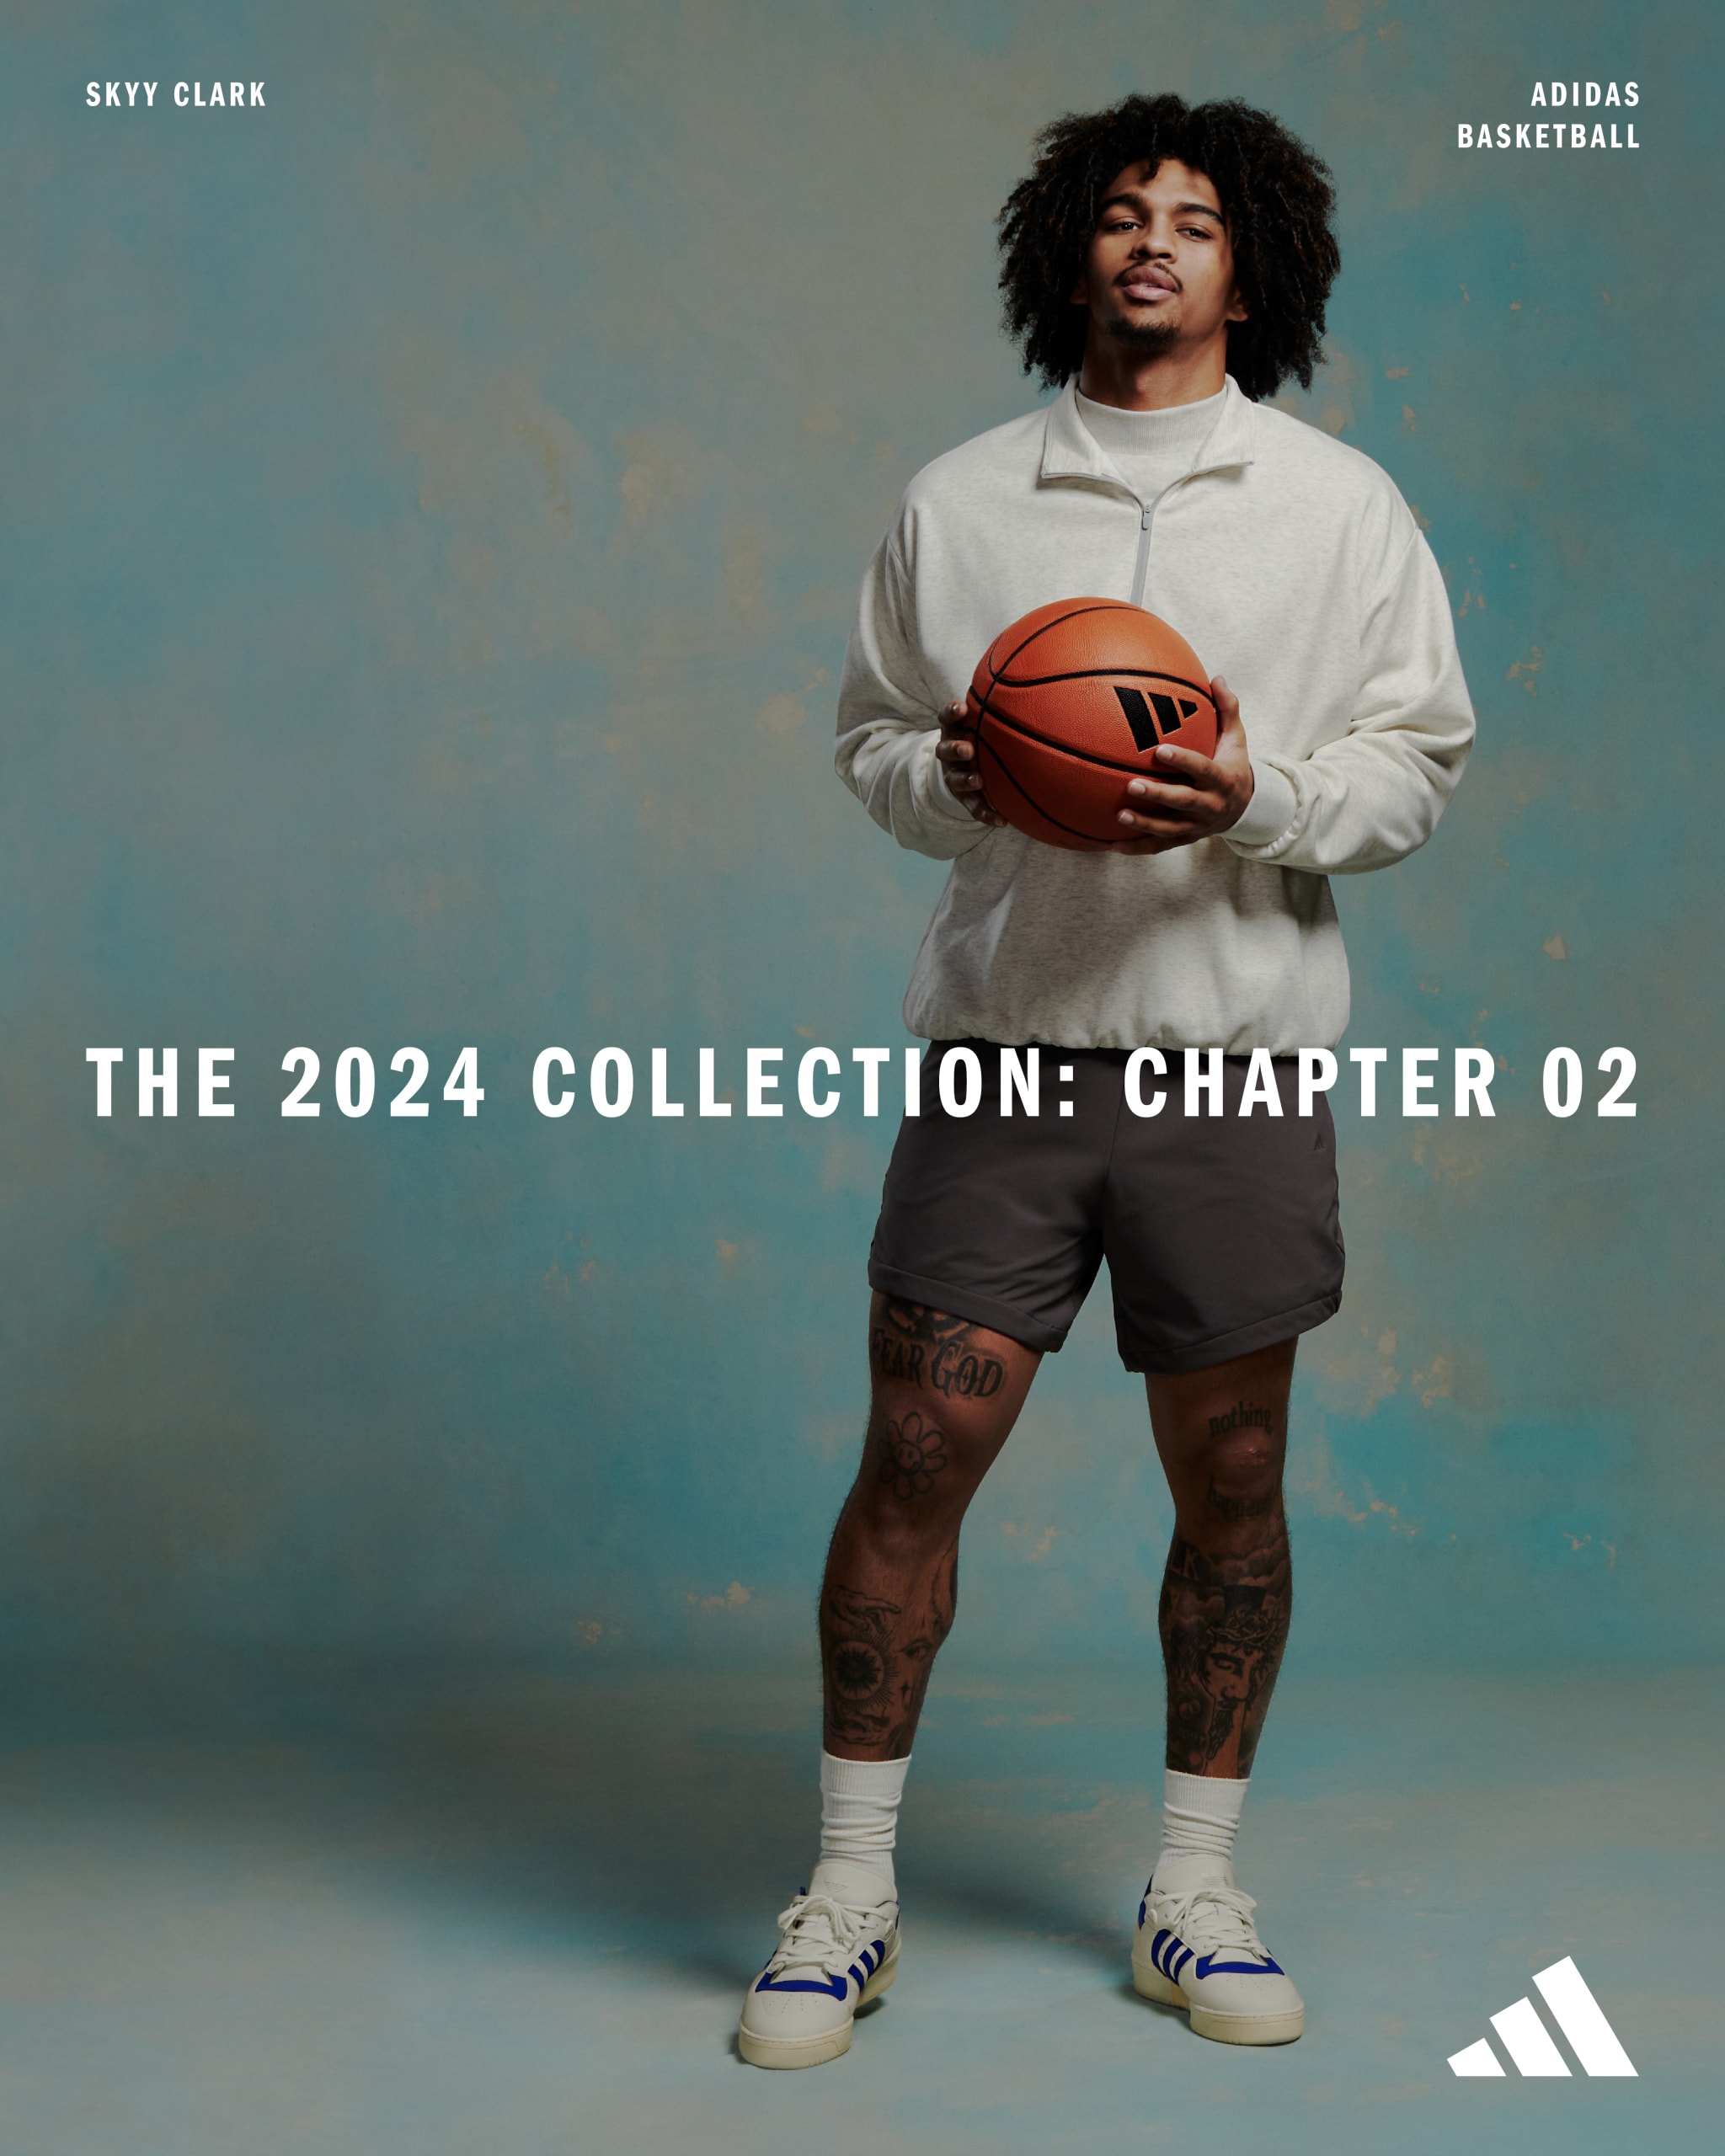 adidas Basketball 发布 THE 2024 COLLECTION: CHAPTER 02 系列